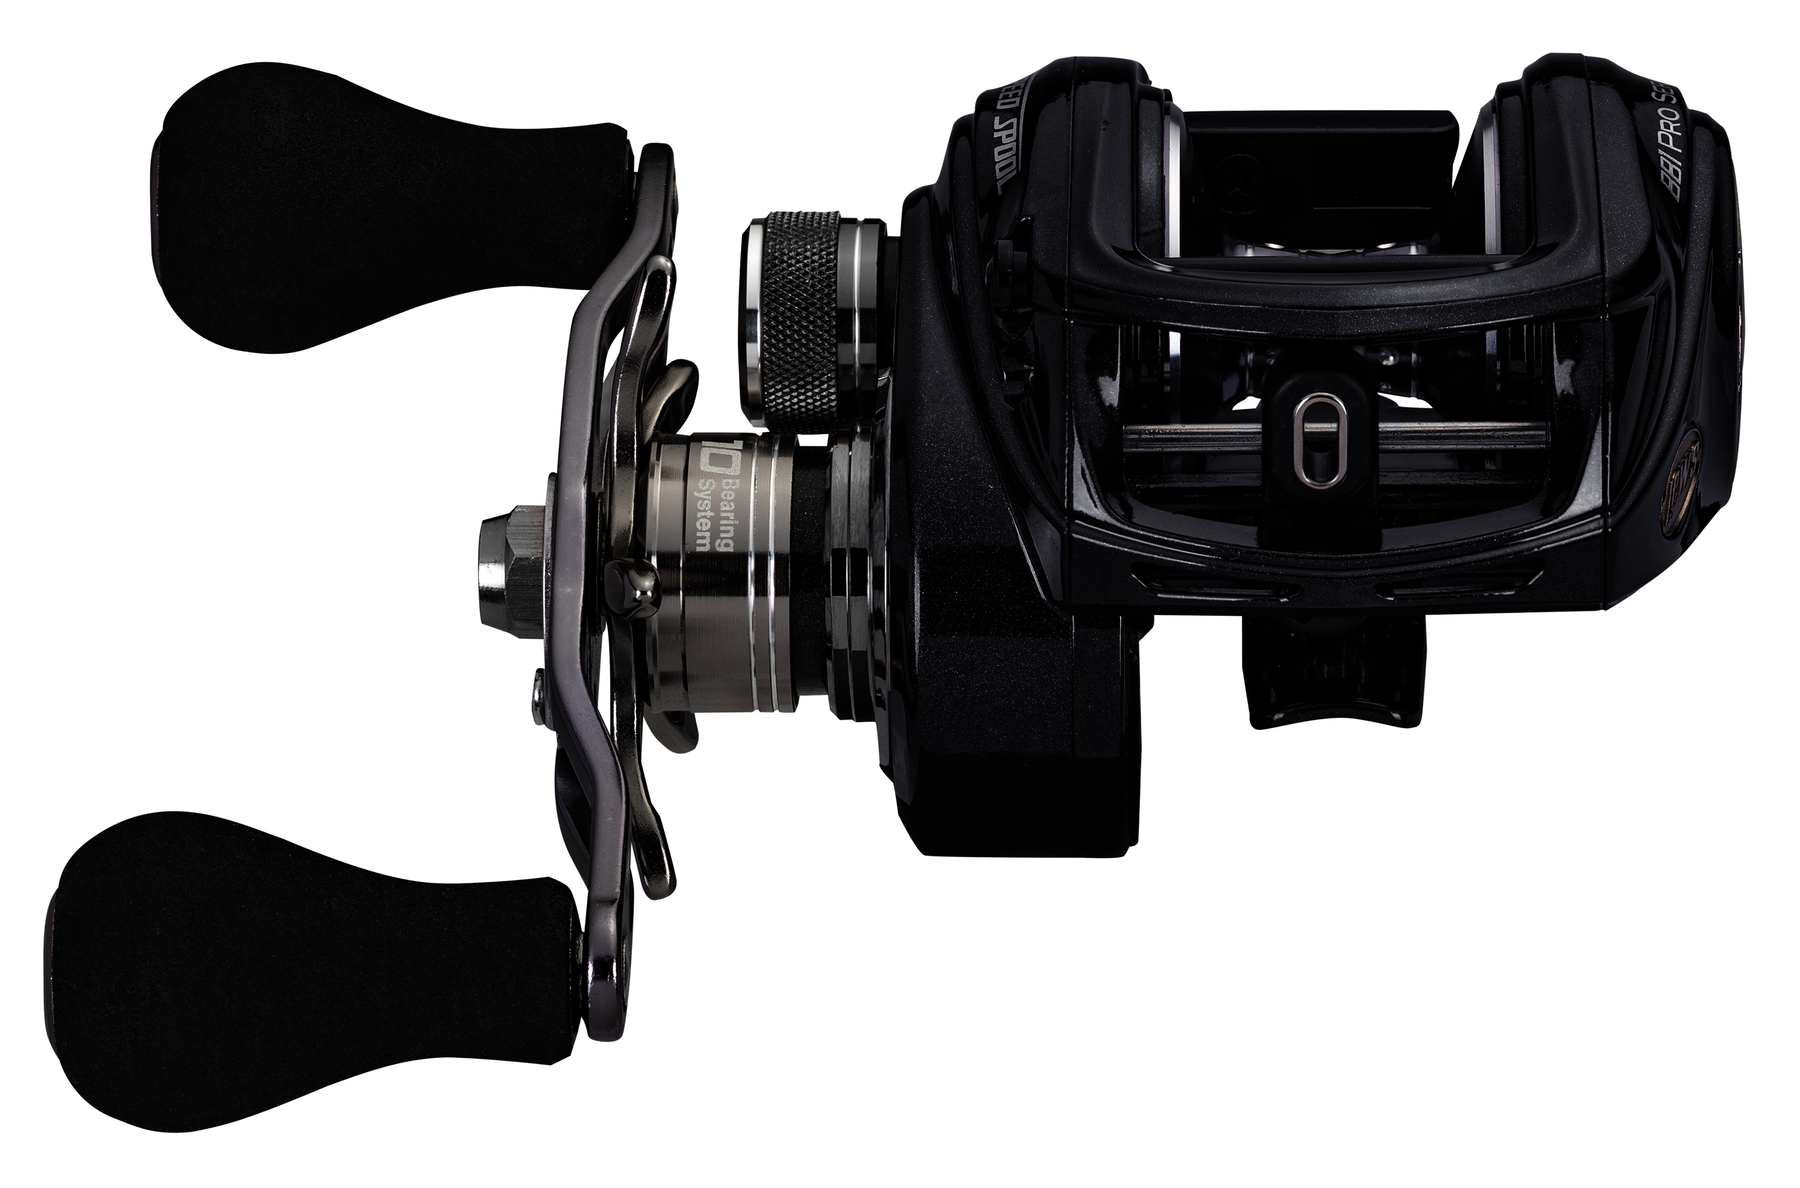 The Lew's BB1 Pro Baitcast Reel is Built for Hours on the Water   Dependable. Exceptional. The newly revamped BB1 Pro Baitcast Reel is built  for long hours on the water under